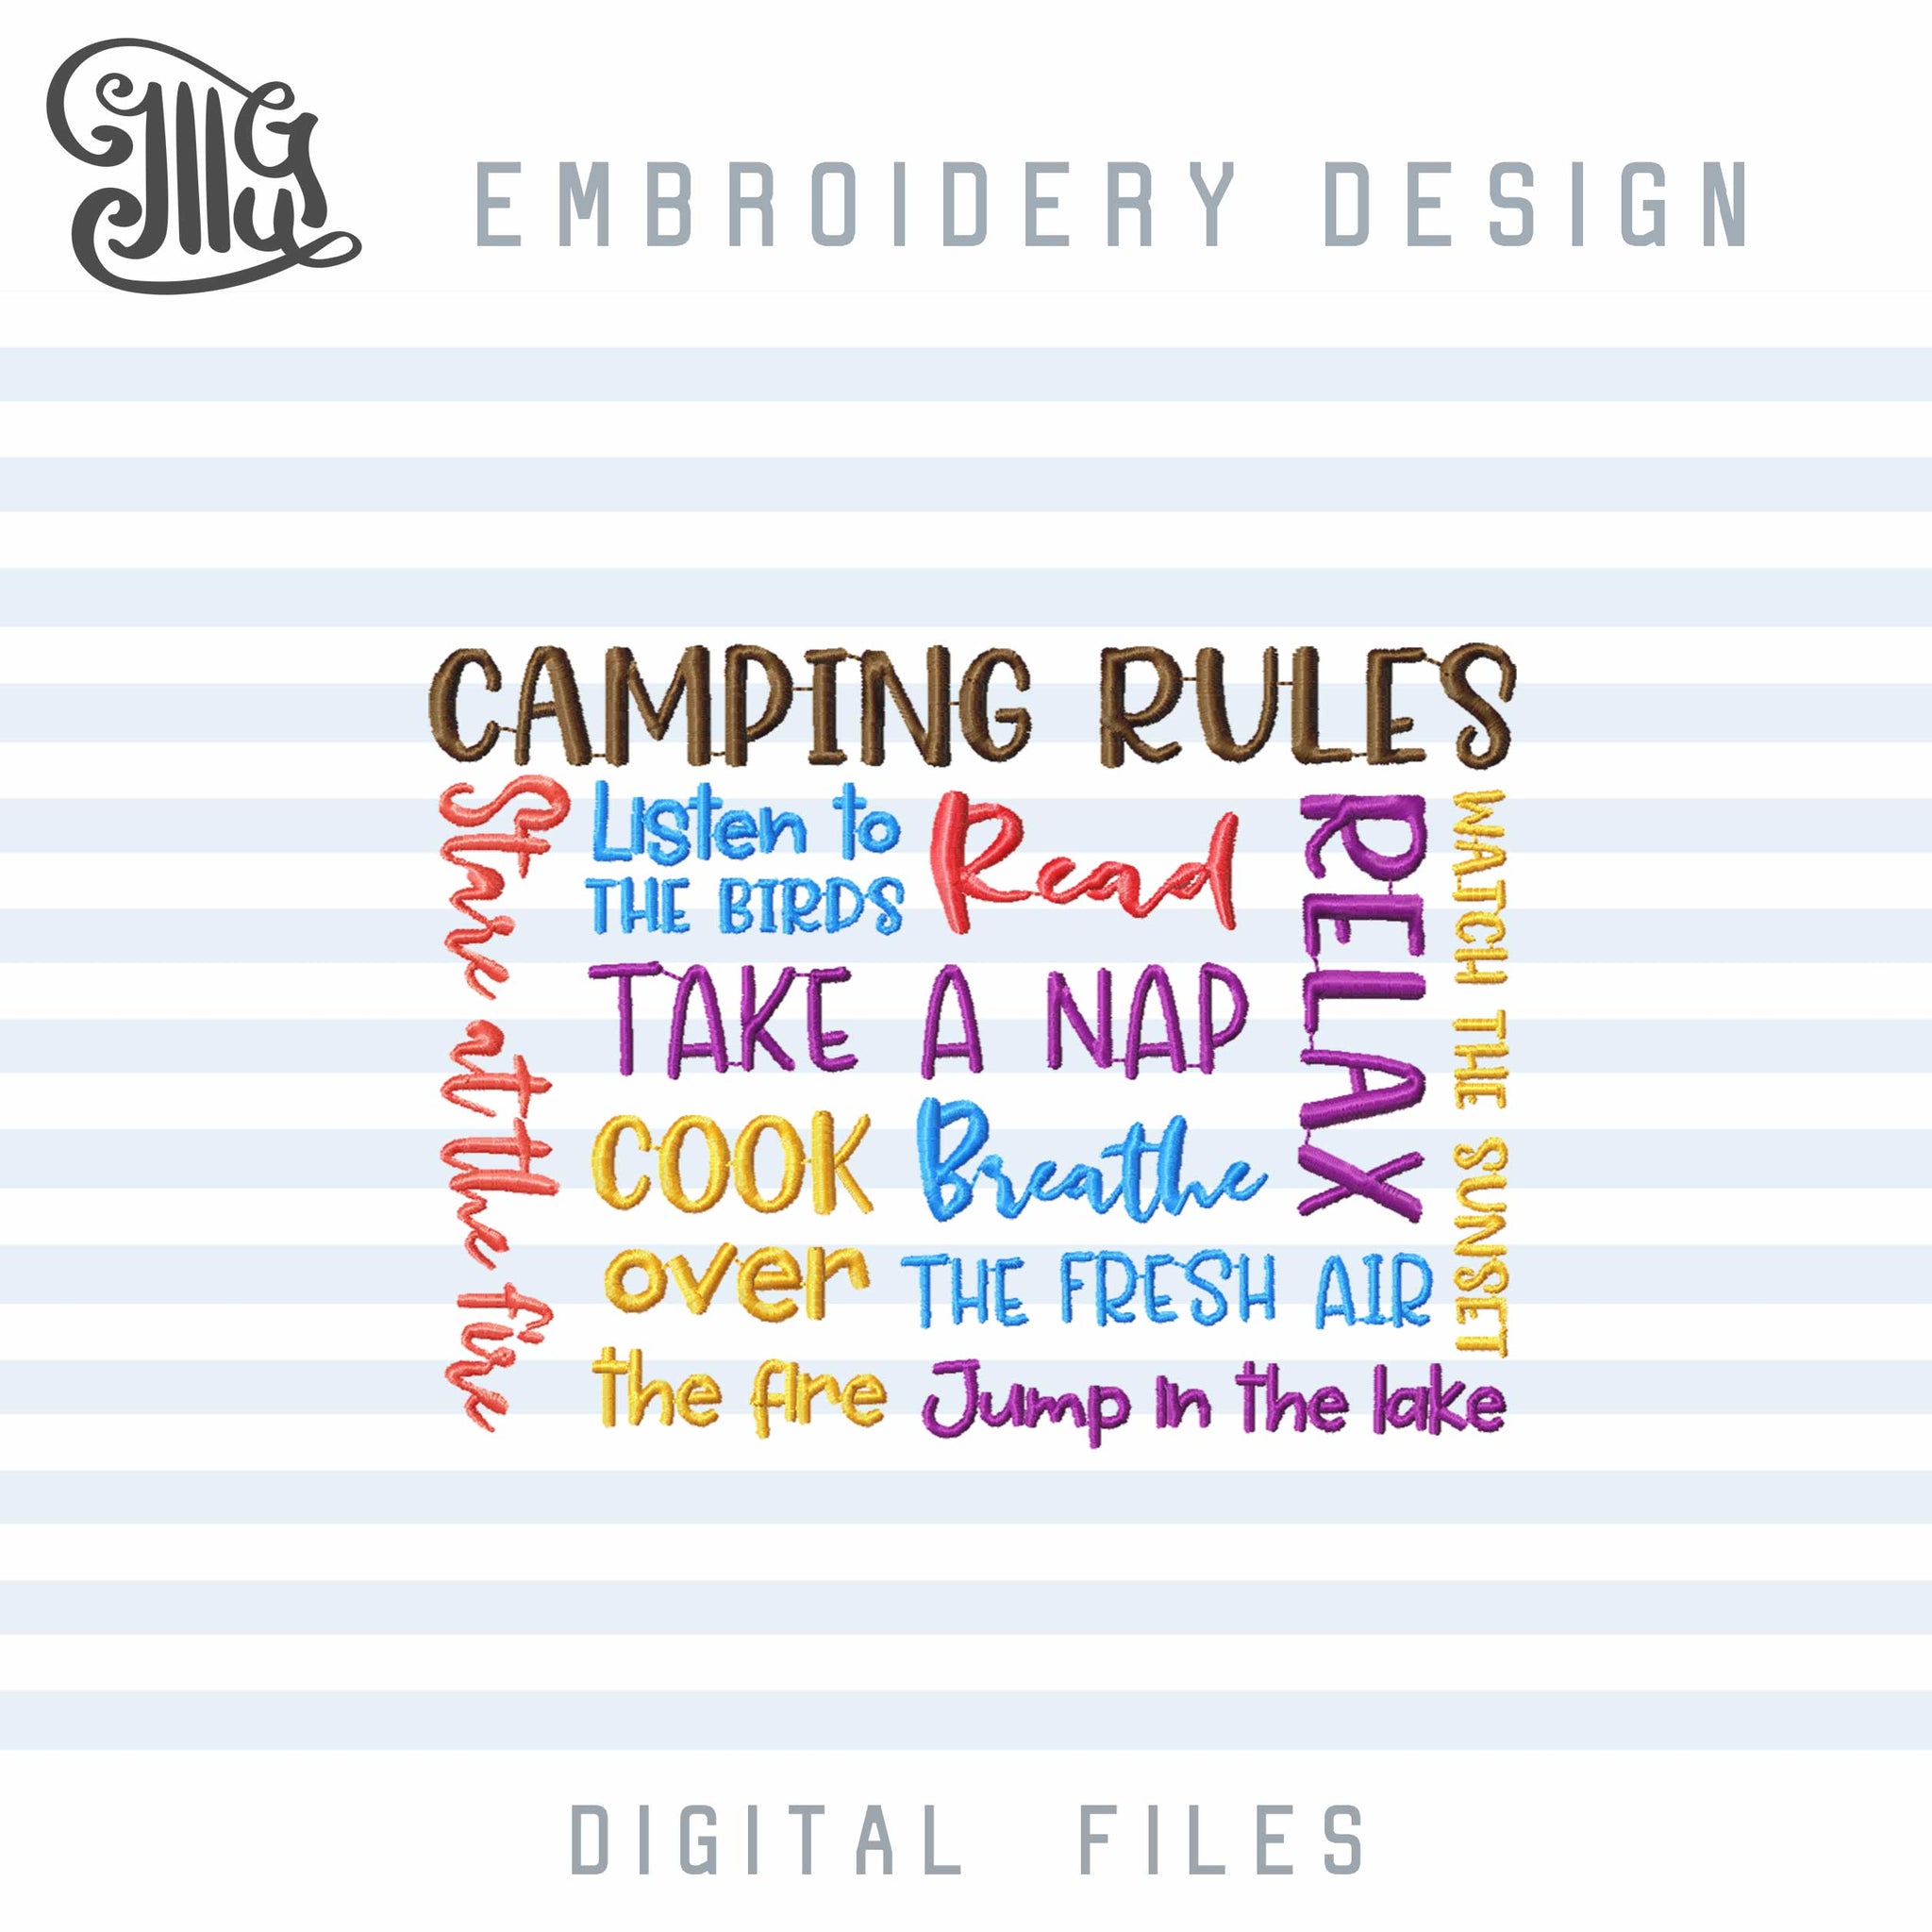 Download Camping Rules Embroidery Designs, Camping Flag Embroidery ...